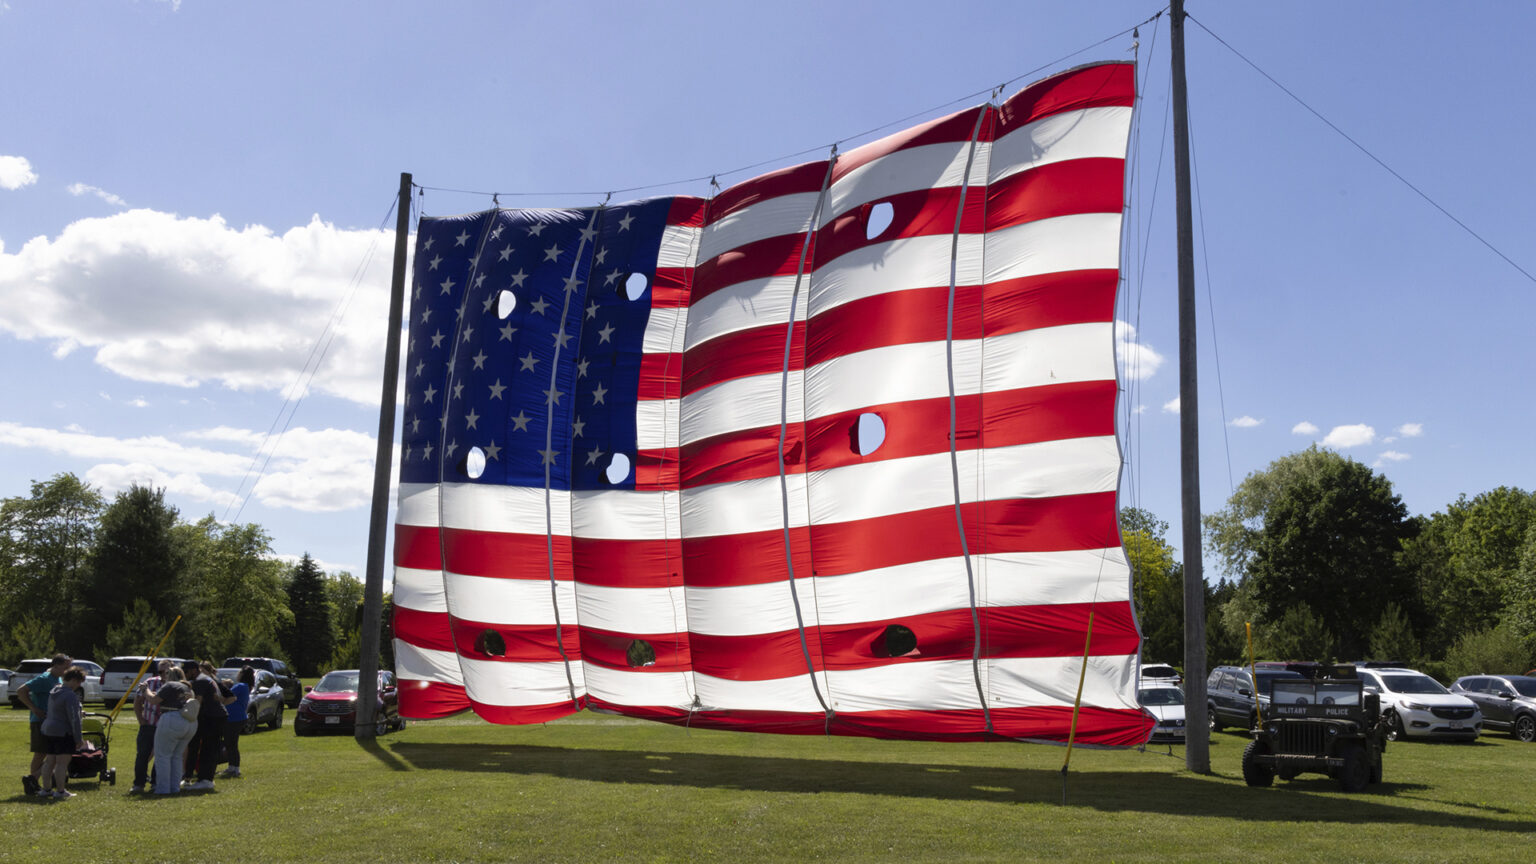 A multi-story tall U.S. flag with nine circular holds in it to allow for wind passage is mounted on a system of ropes and pulleys on two tall wood poles, with several people standing near the base of one and a UTV parked near the base of another, with parked cars and trees in the background.